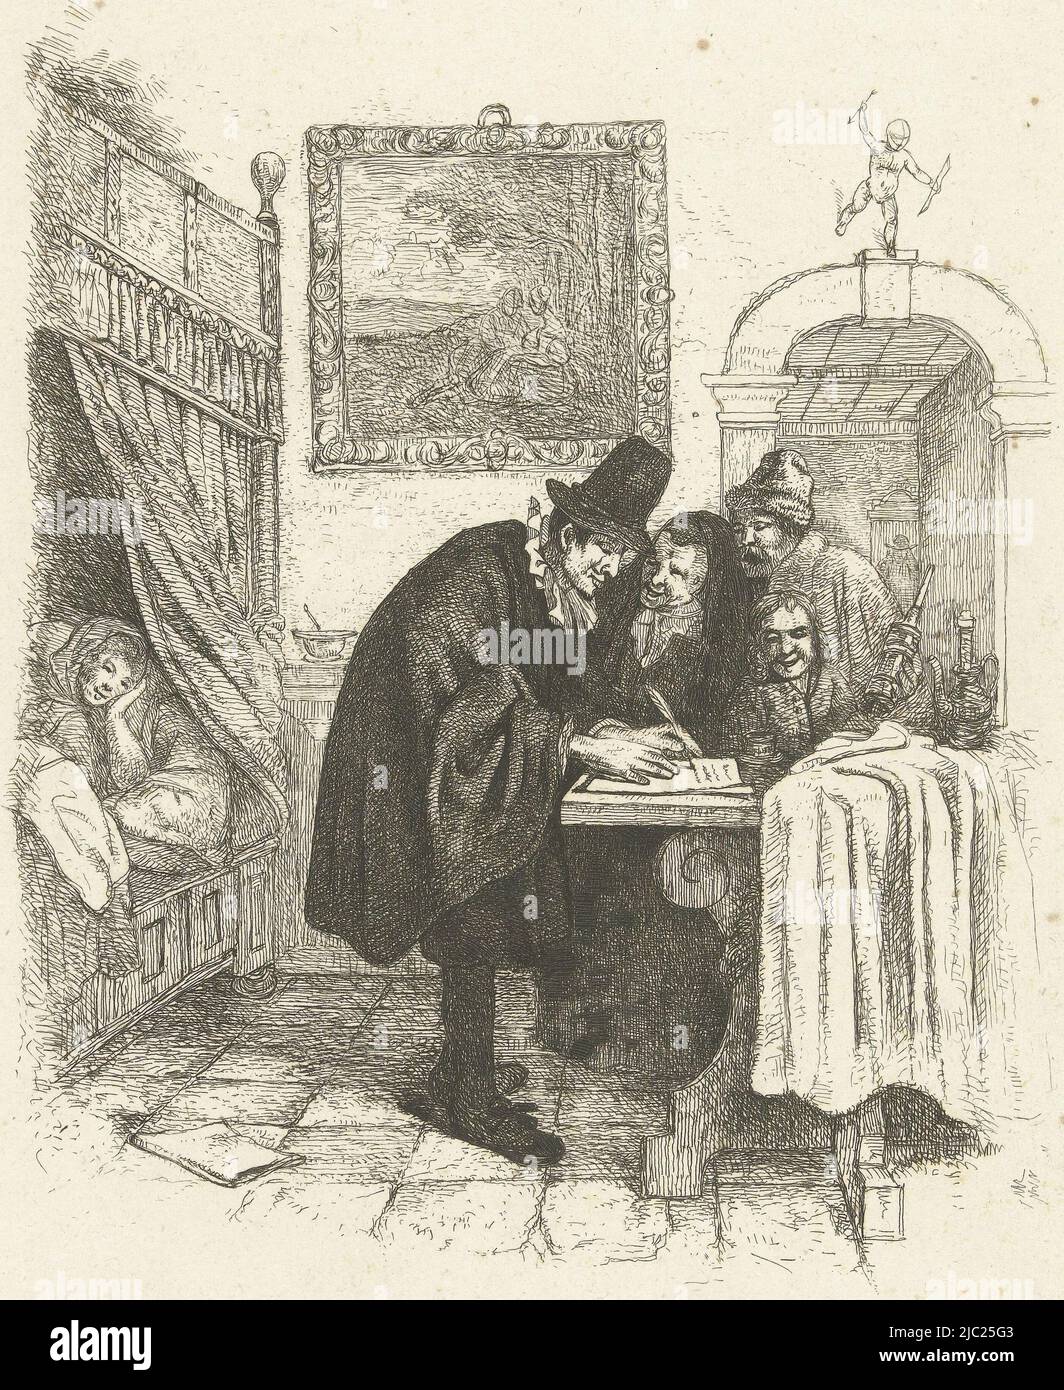 A doctor writes a prescription standing at a table. An old woman, a man with a glandular syringe and a boy look on. The patient, a sick woman, is in bed. Inside, a painting on the wall depicts a pastoral scene. Atop the counter is a small statue of Amor, Doctor on home visit to sick woman, print maker: Albertus Brondgeest, after: Jan Havicksz. Steen, Netherlands, 1796 - 1849, paper, etching, h 249 mm × w 166 mm Stock Photo